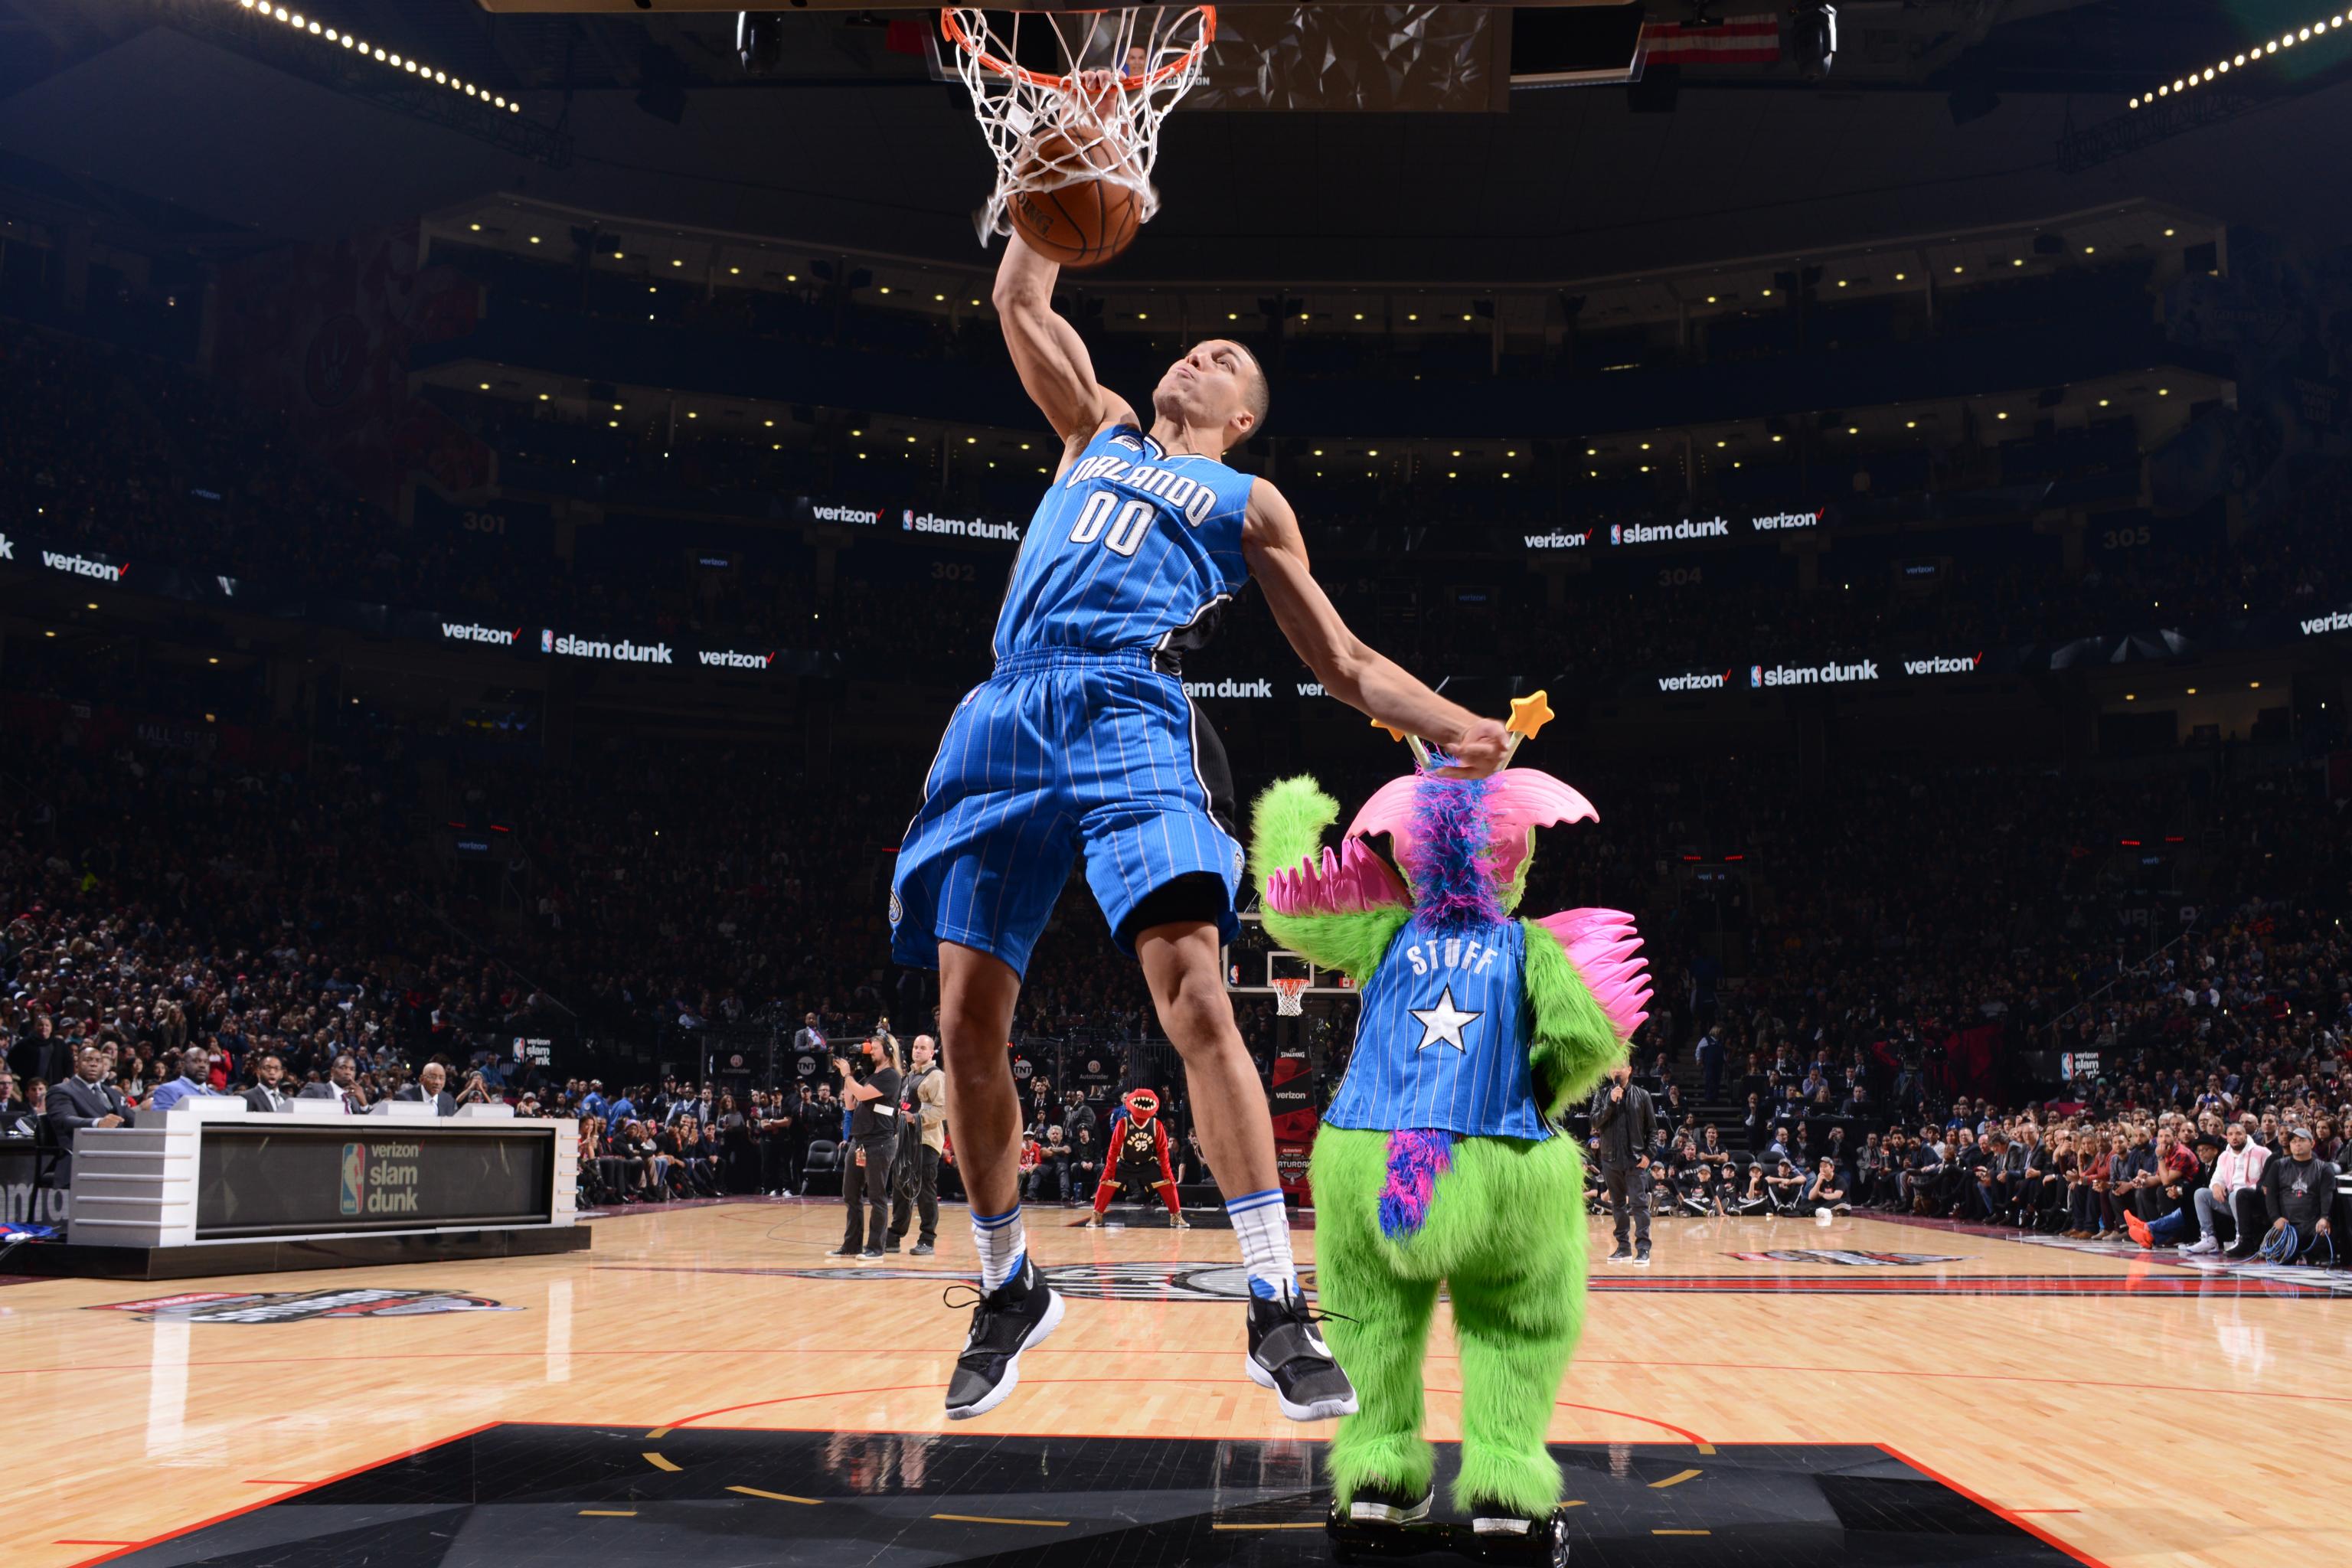 Aaron Gordon seemed to suspend gravity with an incredible